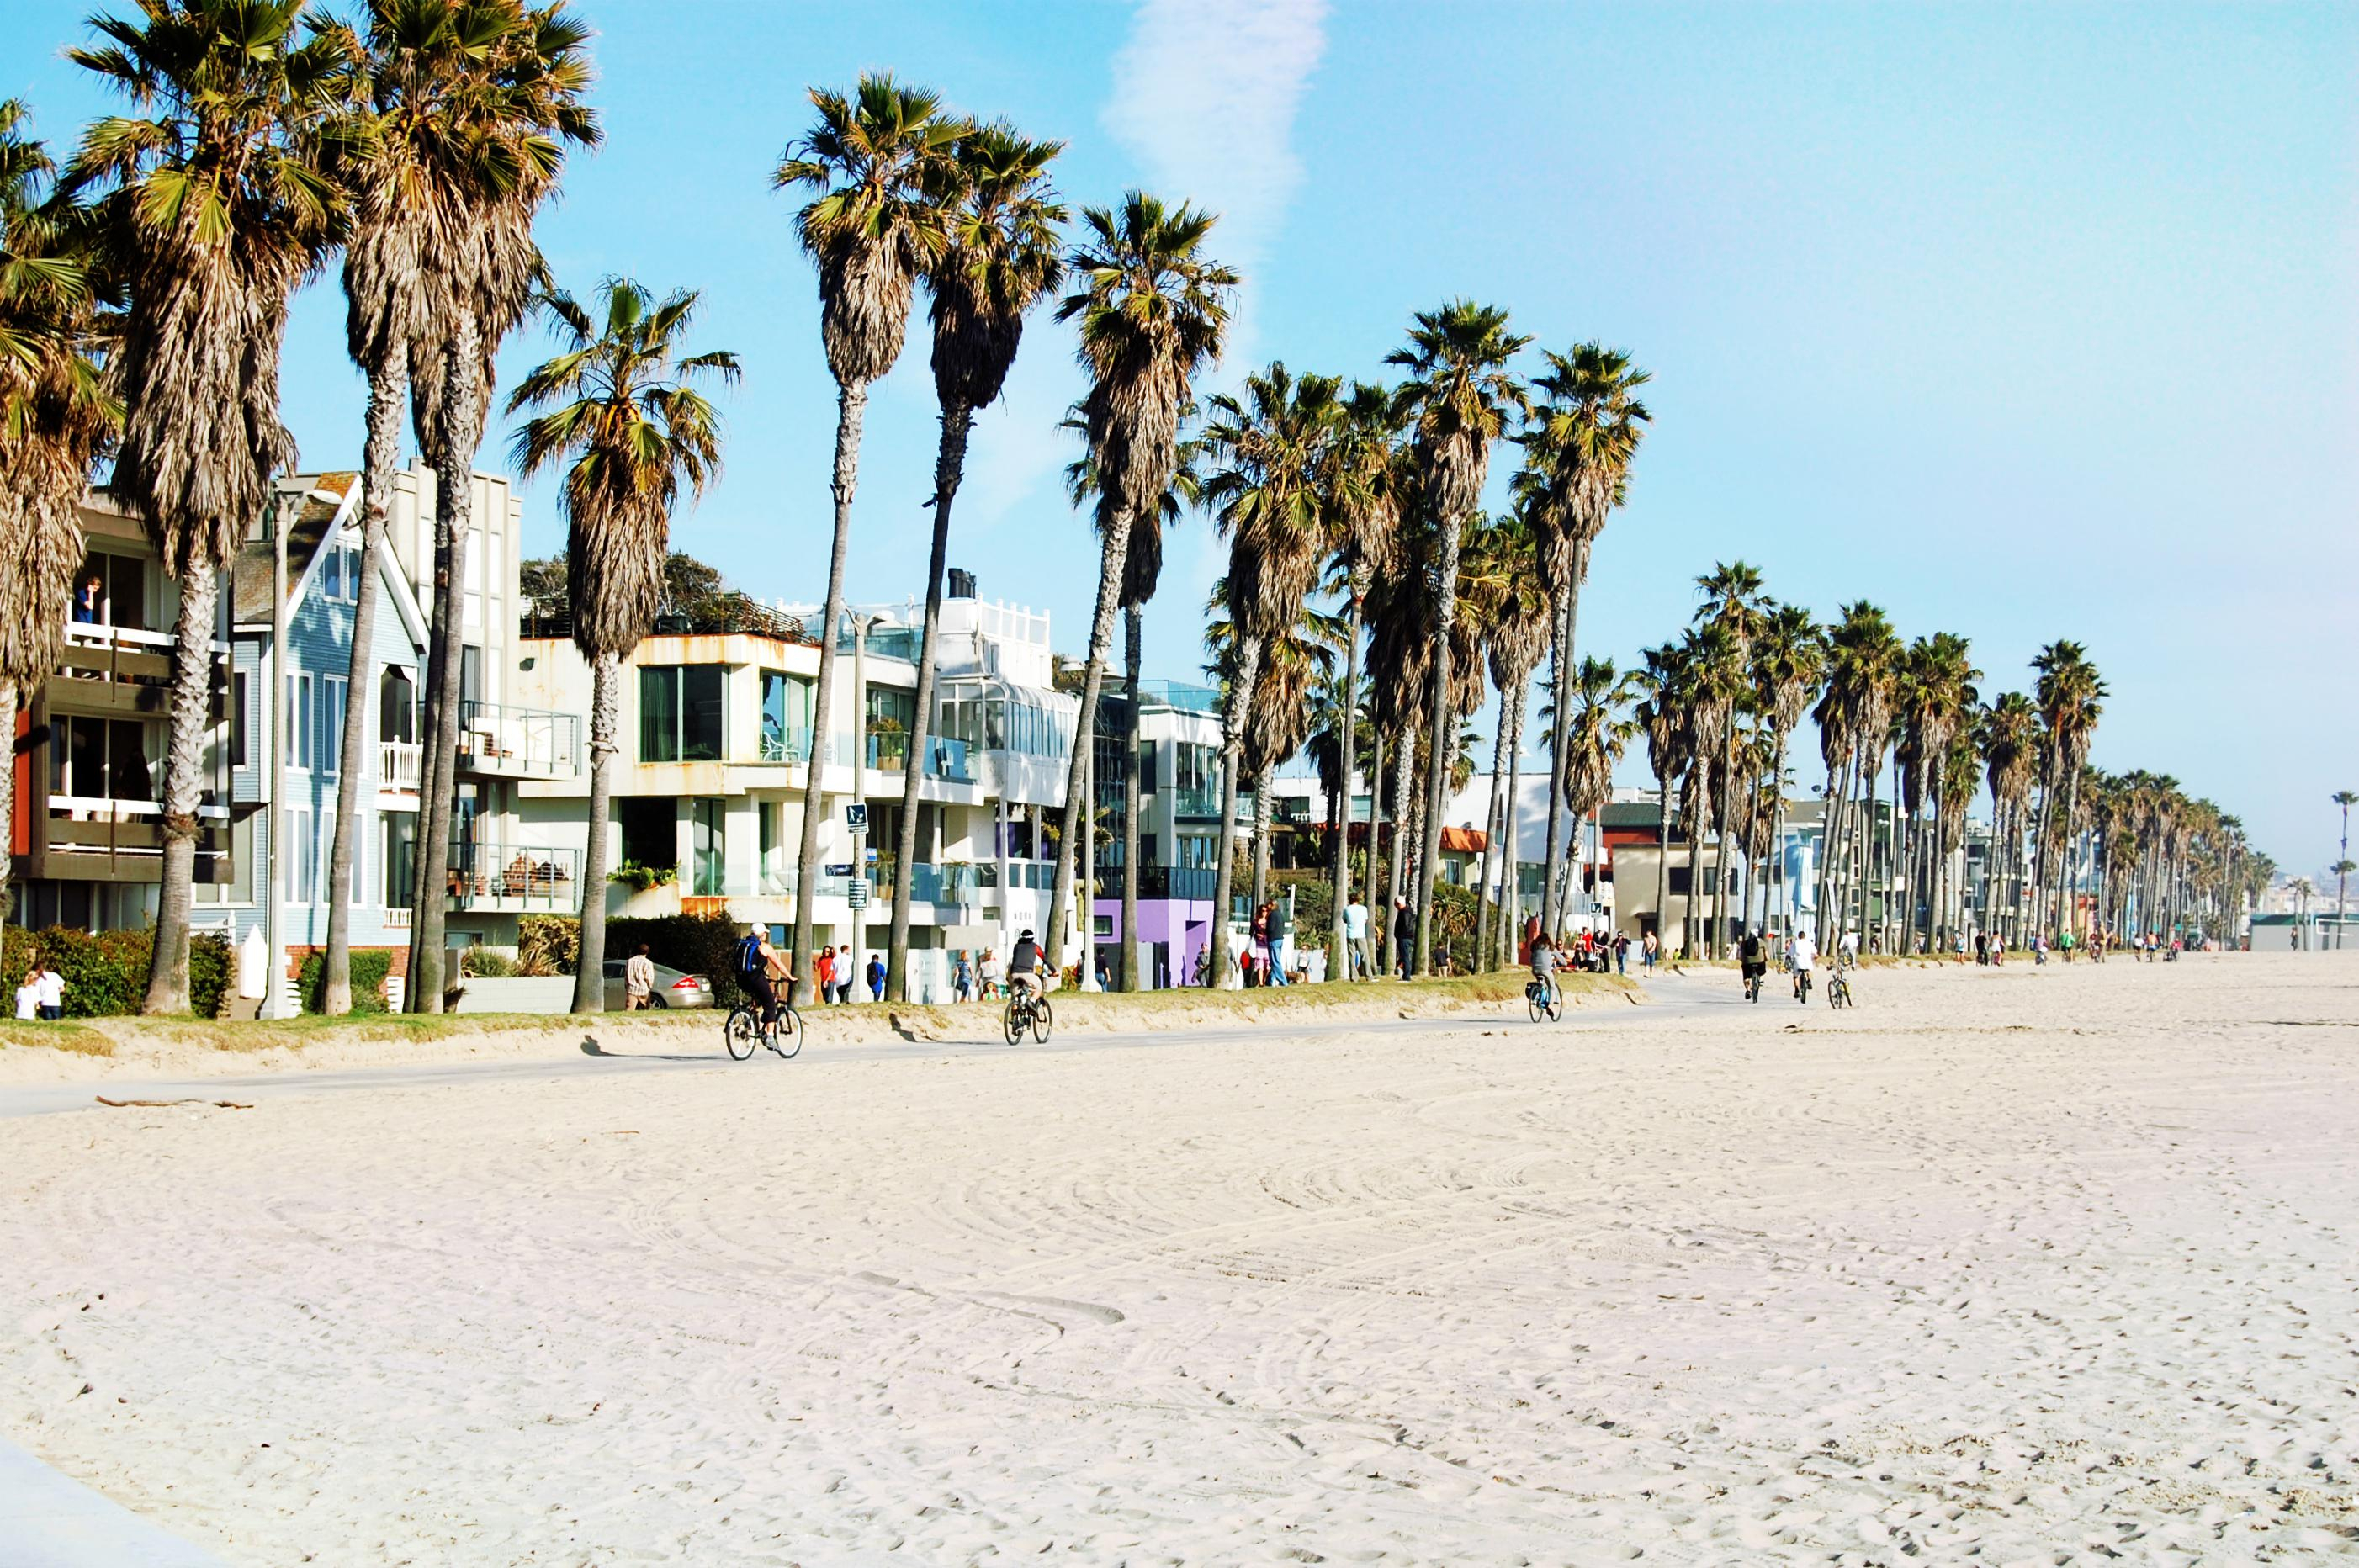 2804x1864 Venice Beach attraction reviews Venice Beach tickets Venice Beach discounts Venice Beach transportation, address, opening hours attractions, hotels, and food near Venice Beach